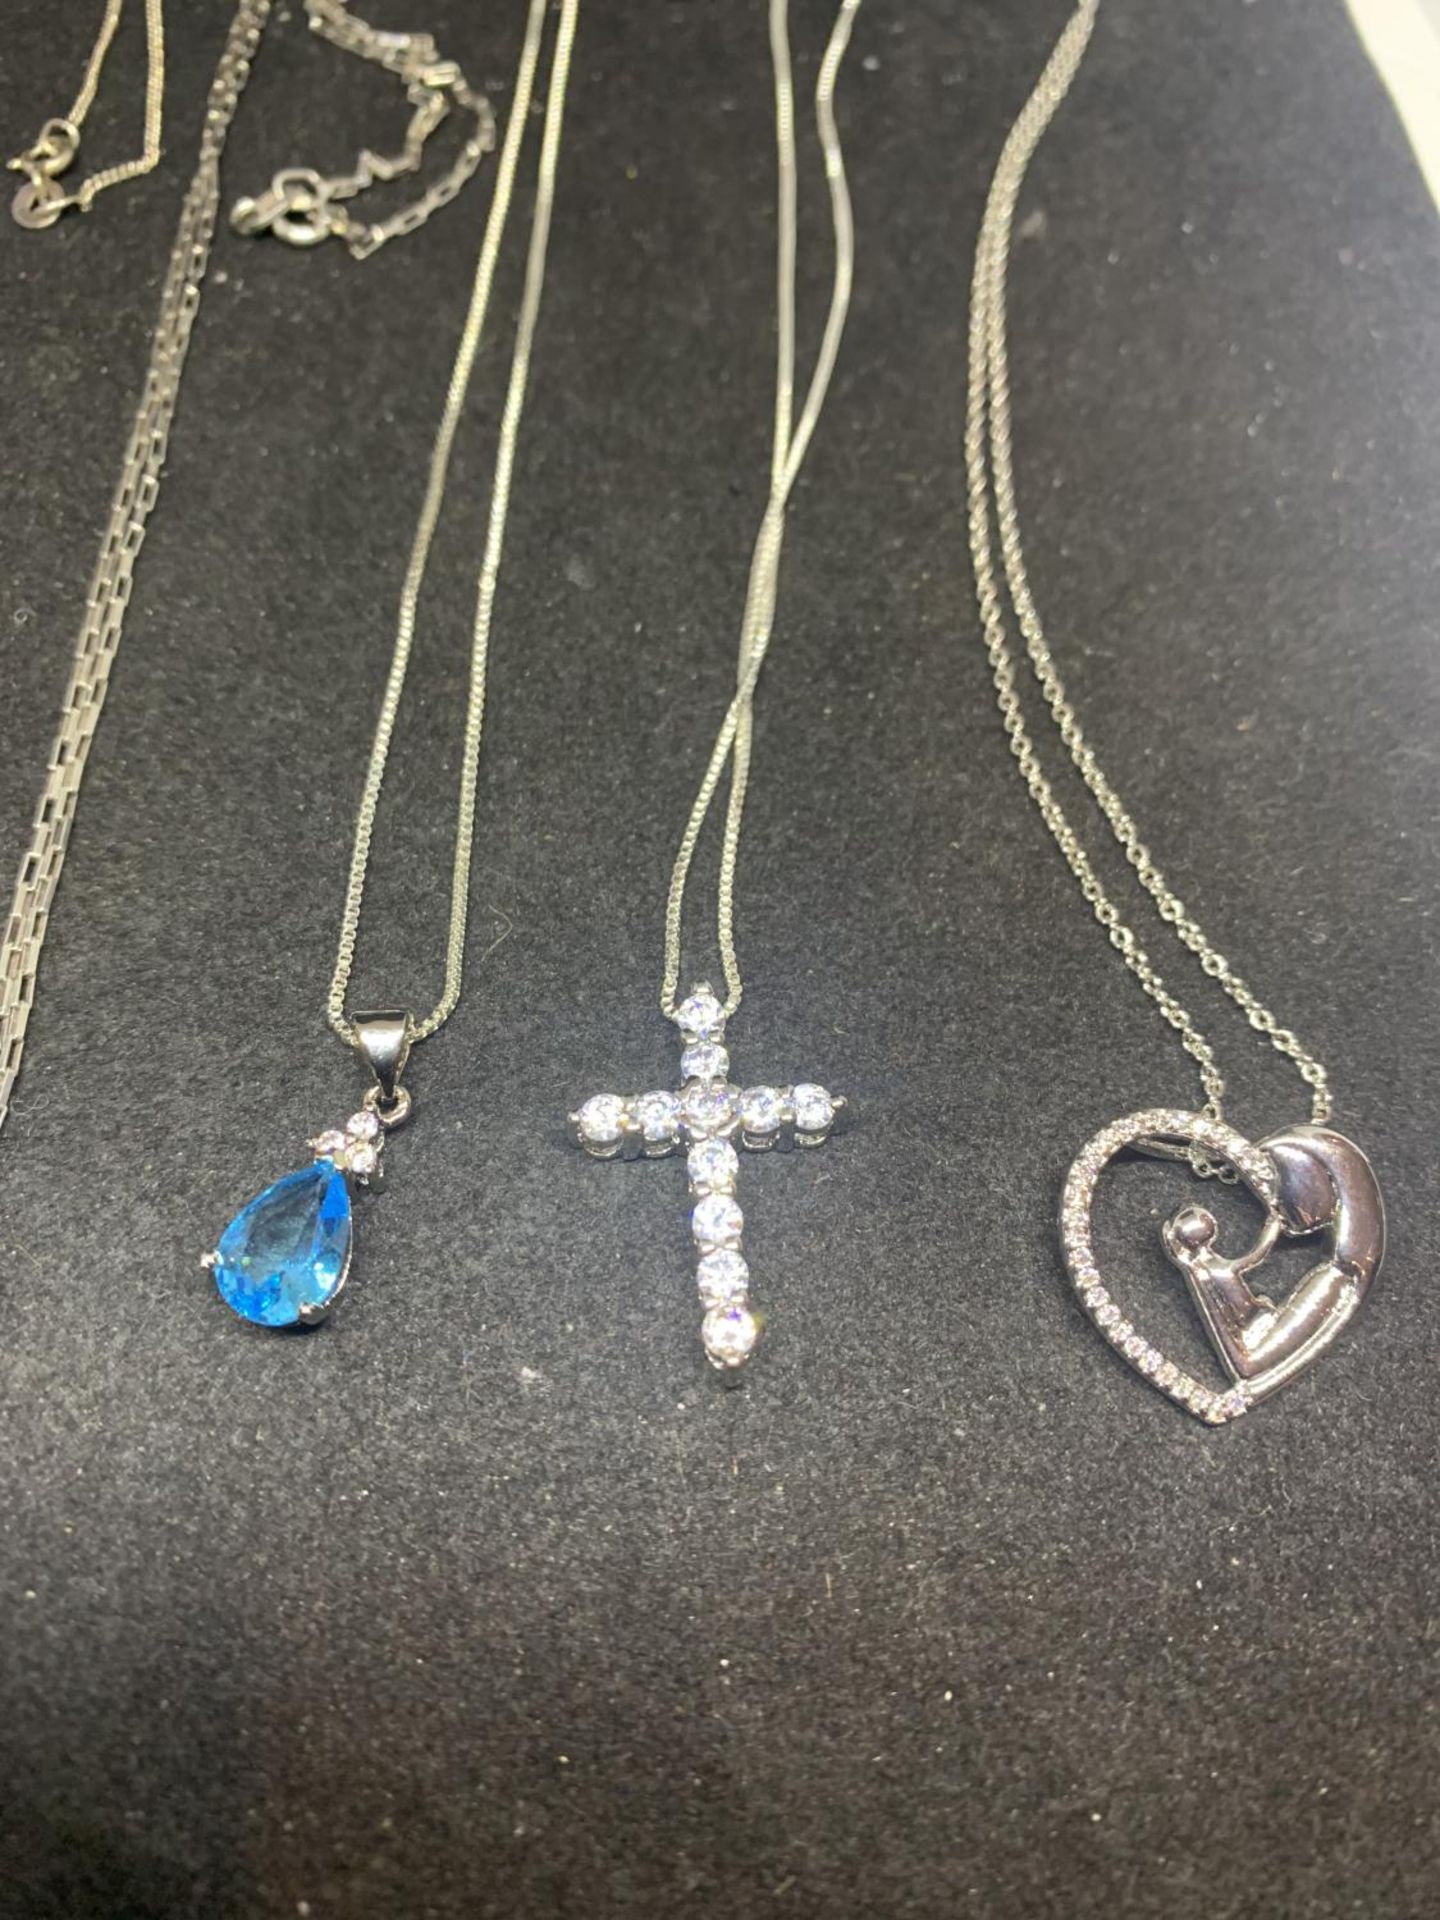 SIX MARKED SLIVER PENDANTS ON CHAINS TO INCLUDE A CLEAR STONE CROSS, HEART, BLUE STONE, PEARL ETC - Image 3 of 3